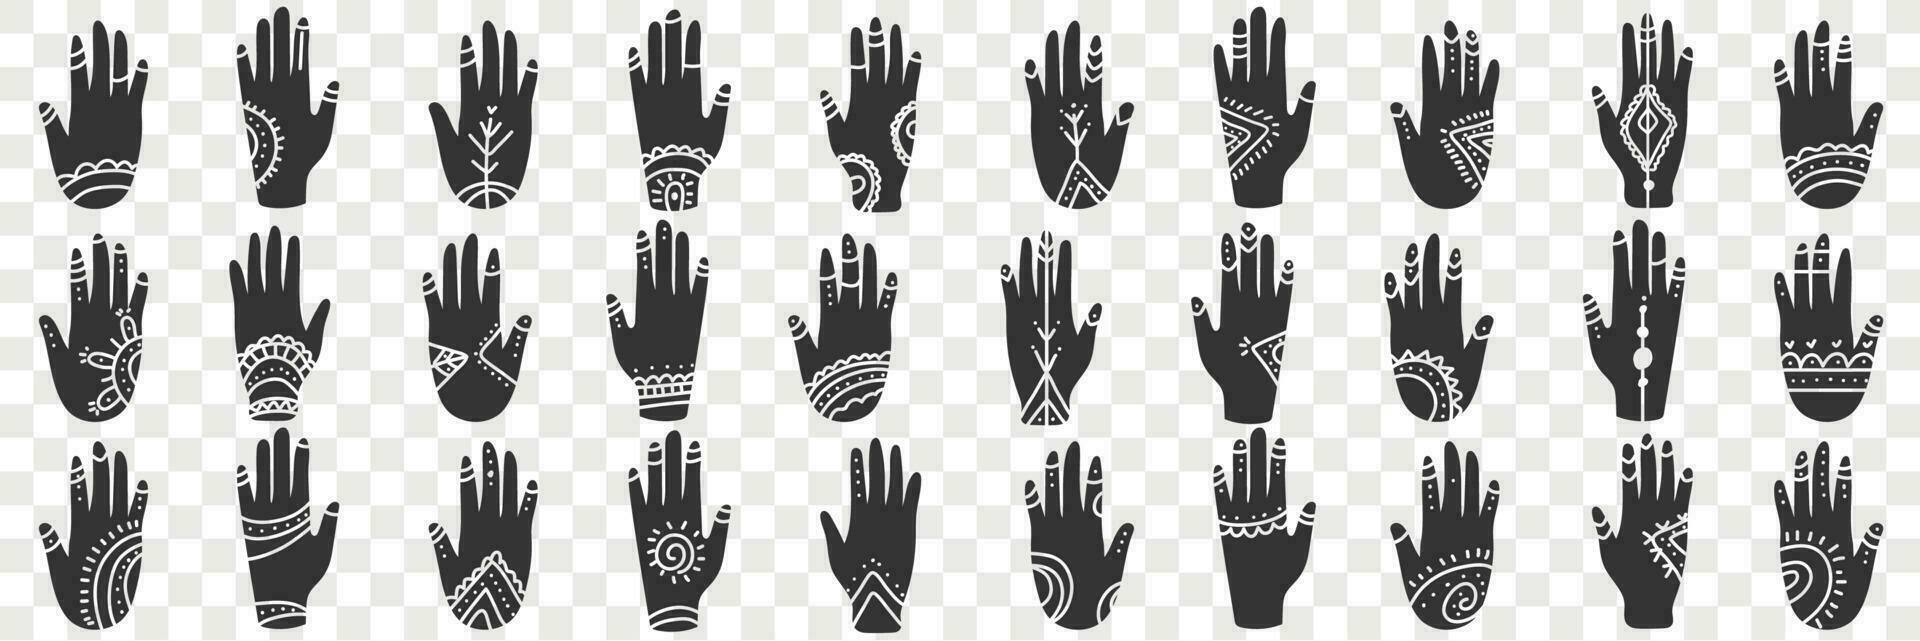 Human hands with occult signs doodle set. Collection of hand drawn various black human hands with spiritual signs and symbols in rows isolated on transparent vector